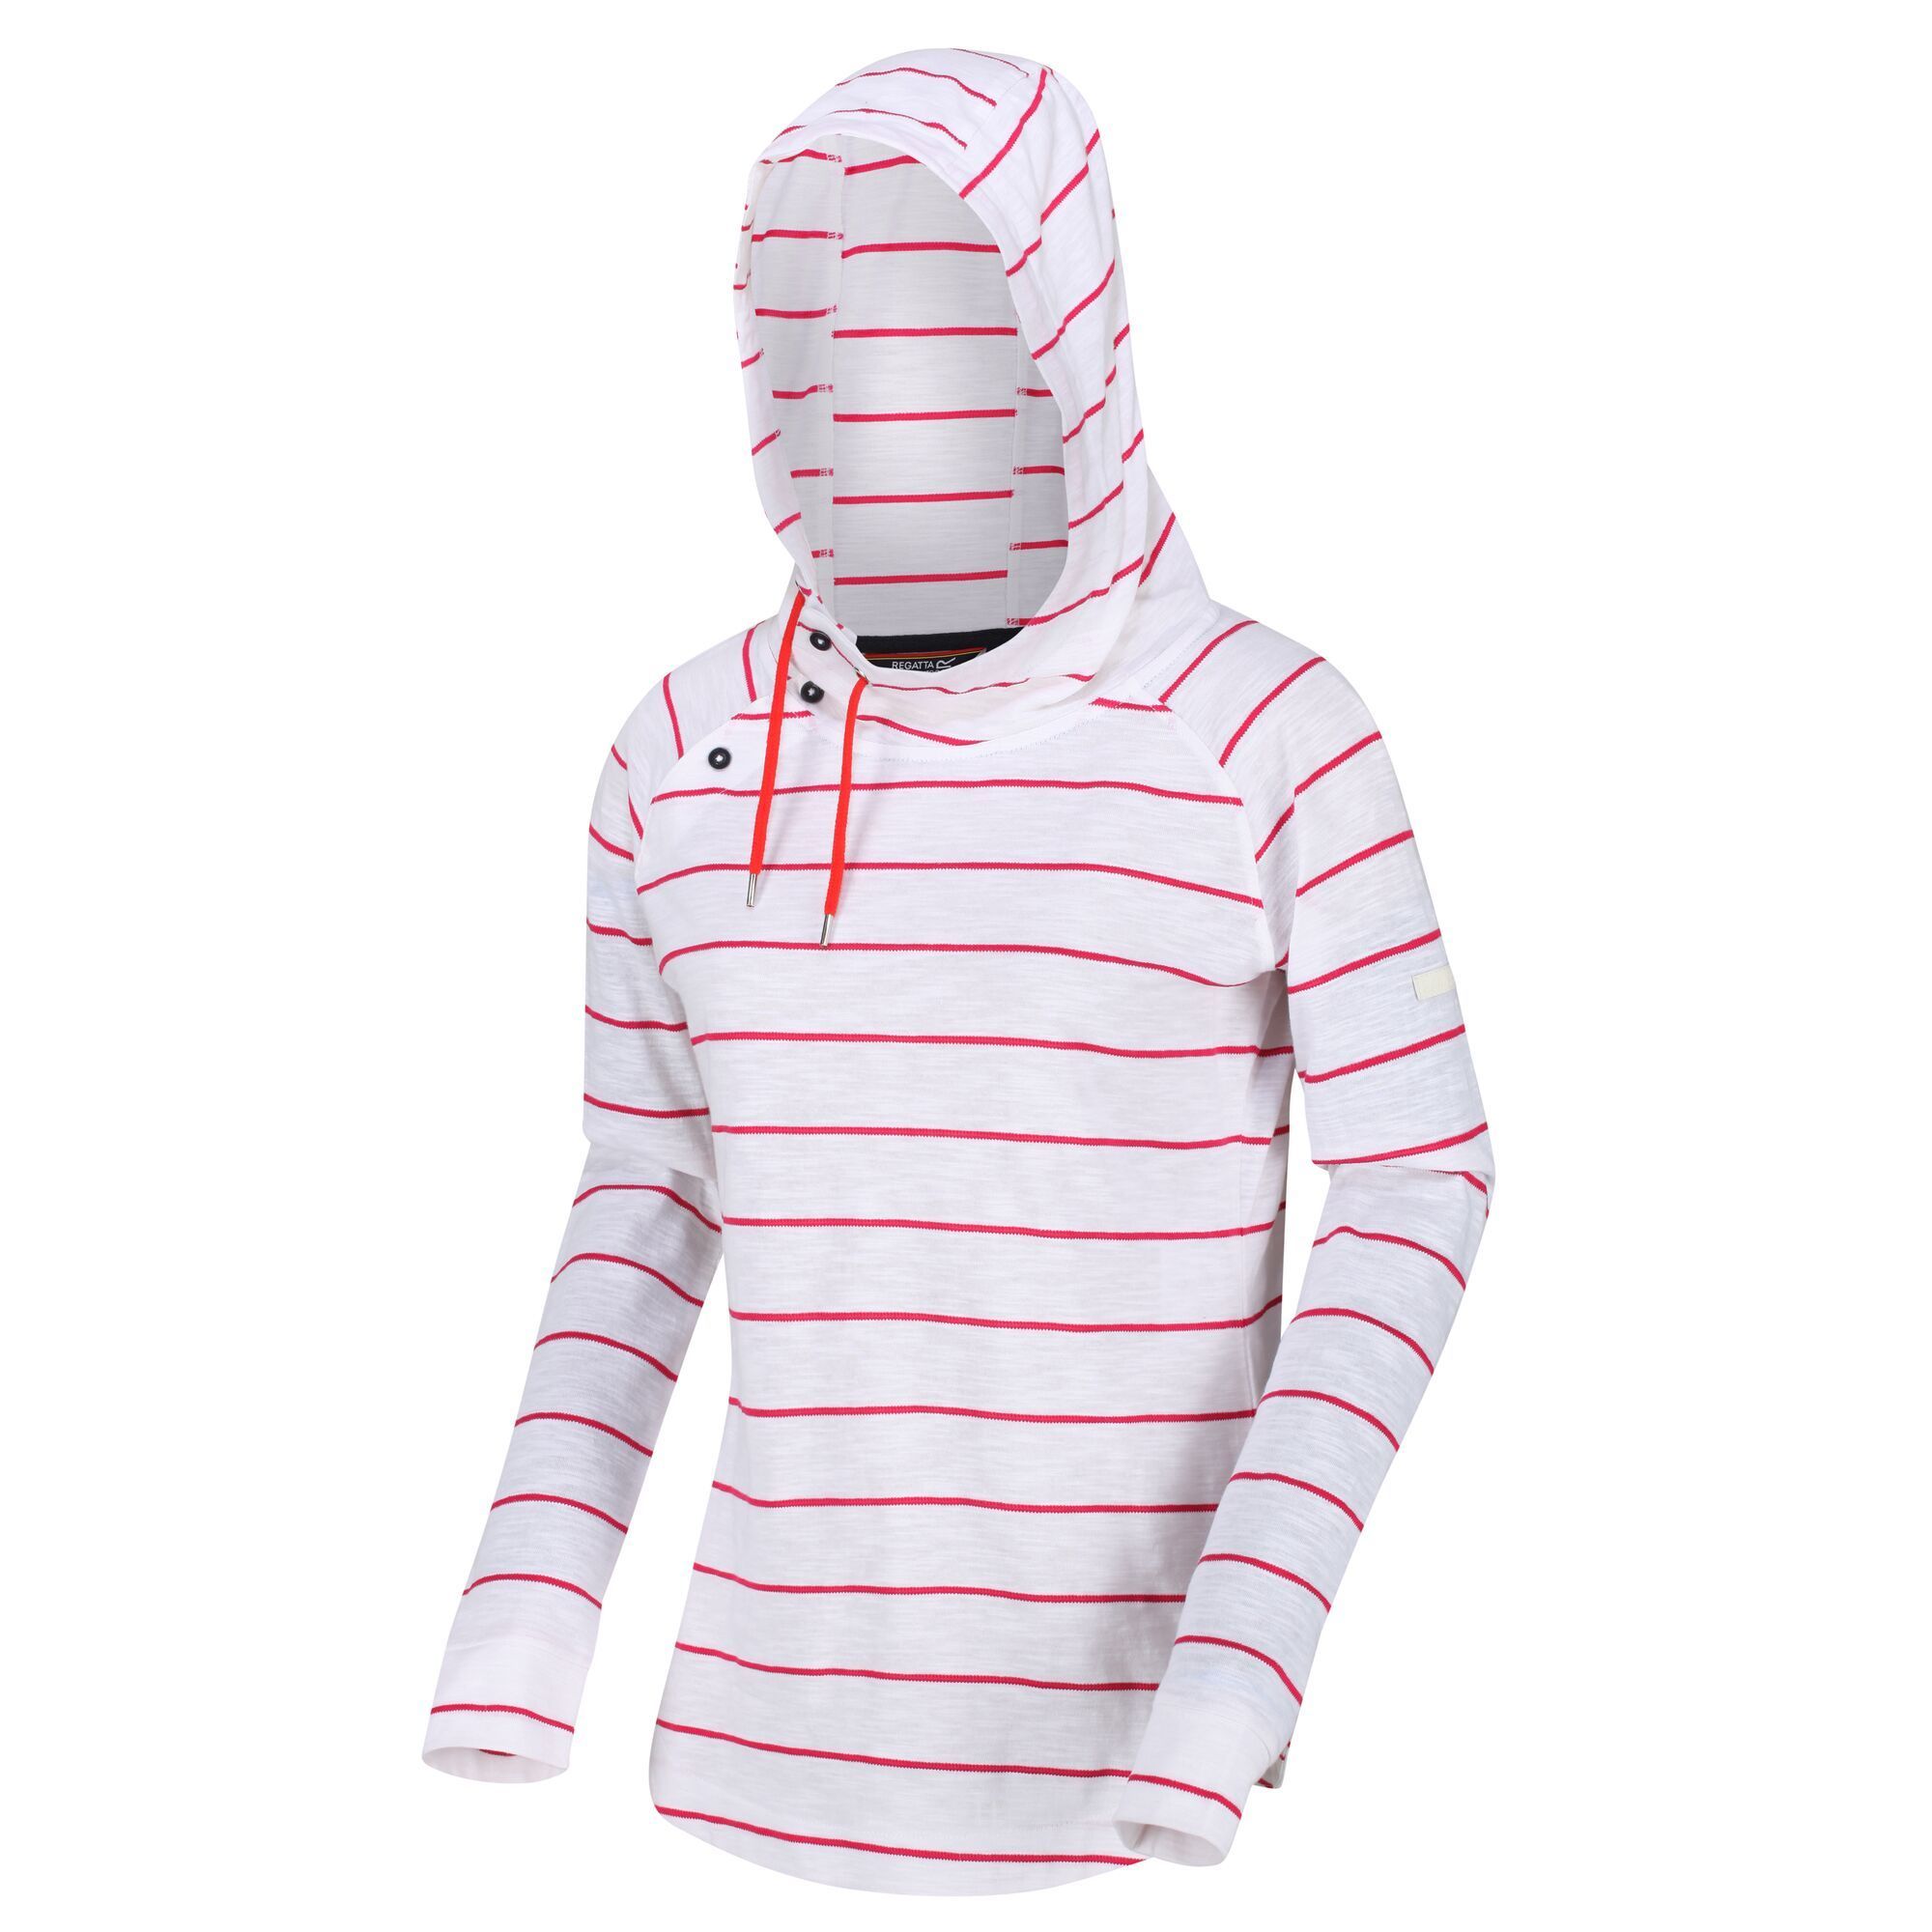 Material: 100% Polyester. Soft-wearing coolweave fabric hoodie with drawcord adjusters. Asymmetric button placket.